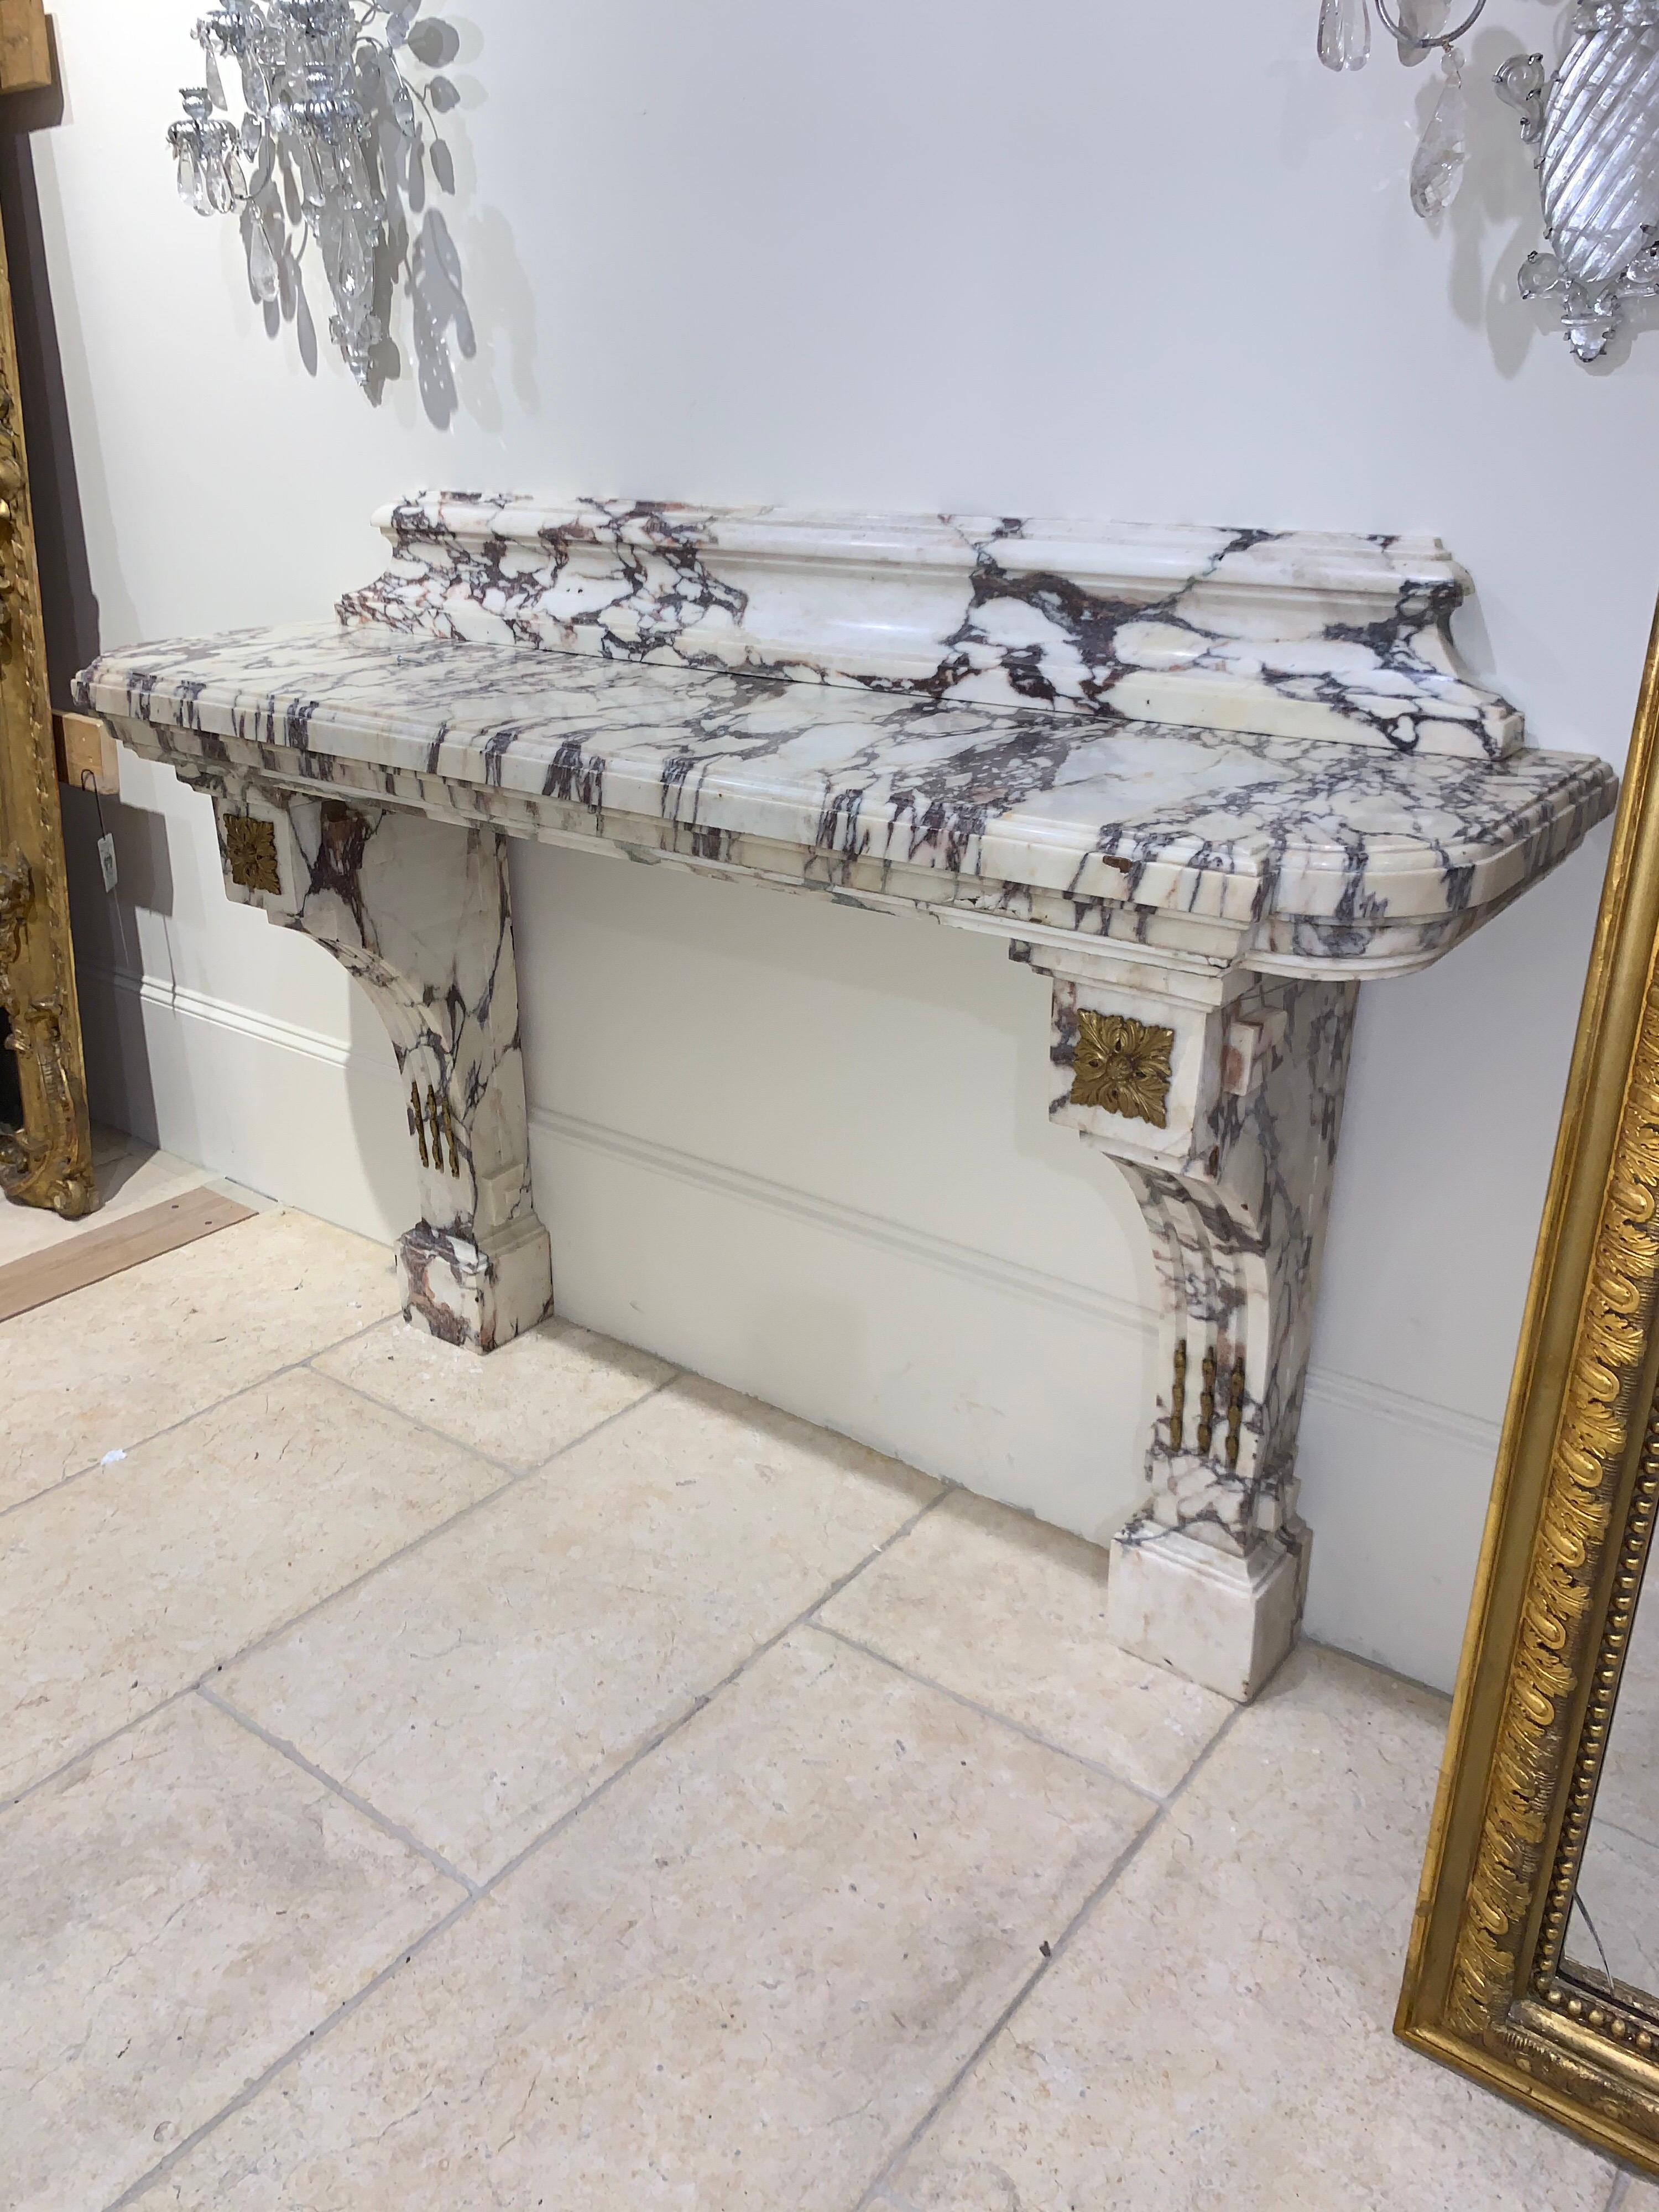 Exquisite early 19th century French Breccia Violetta marble console with bronze mounts. This solid marble piece makes a very impressive statement. Perfect for an elegant home!